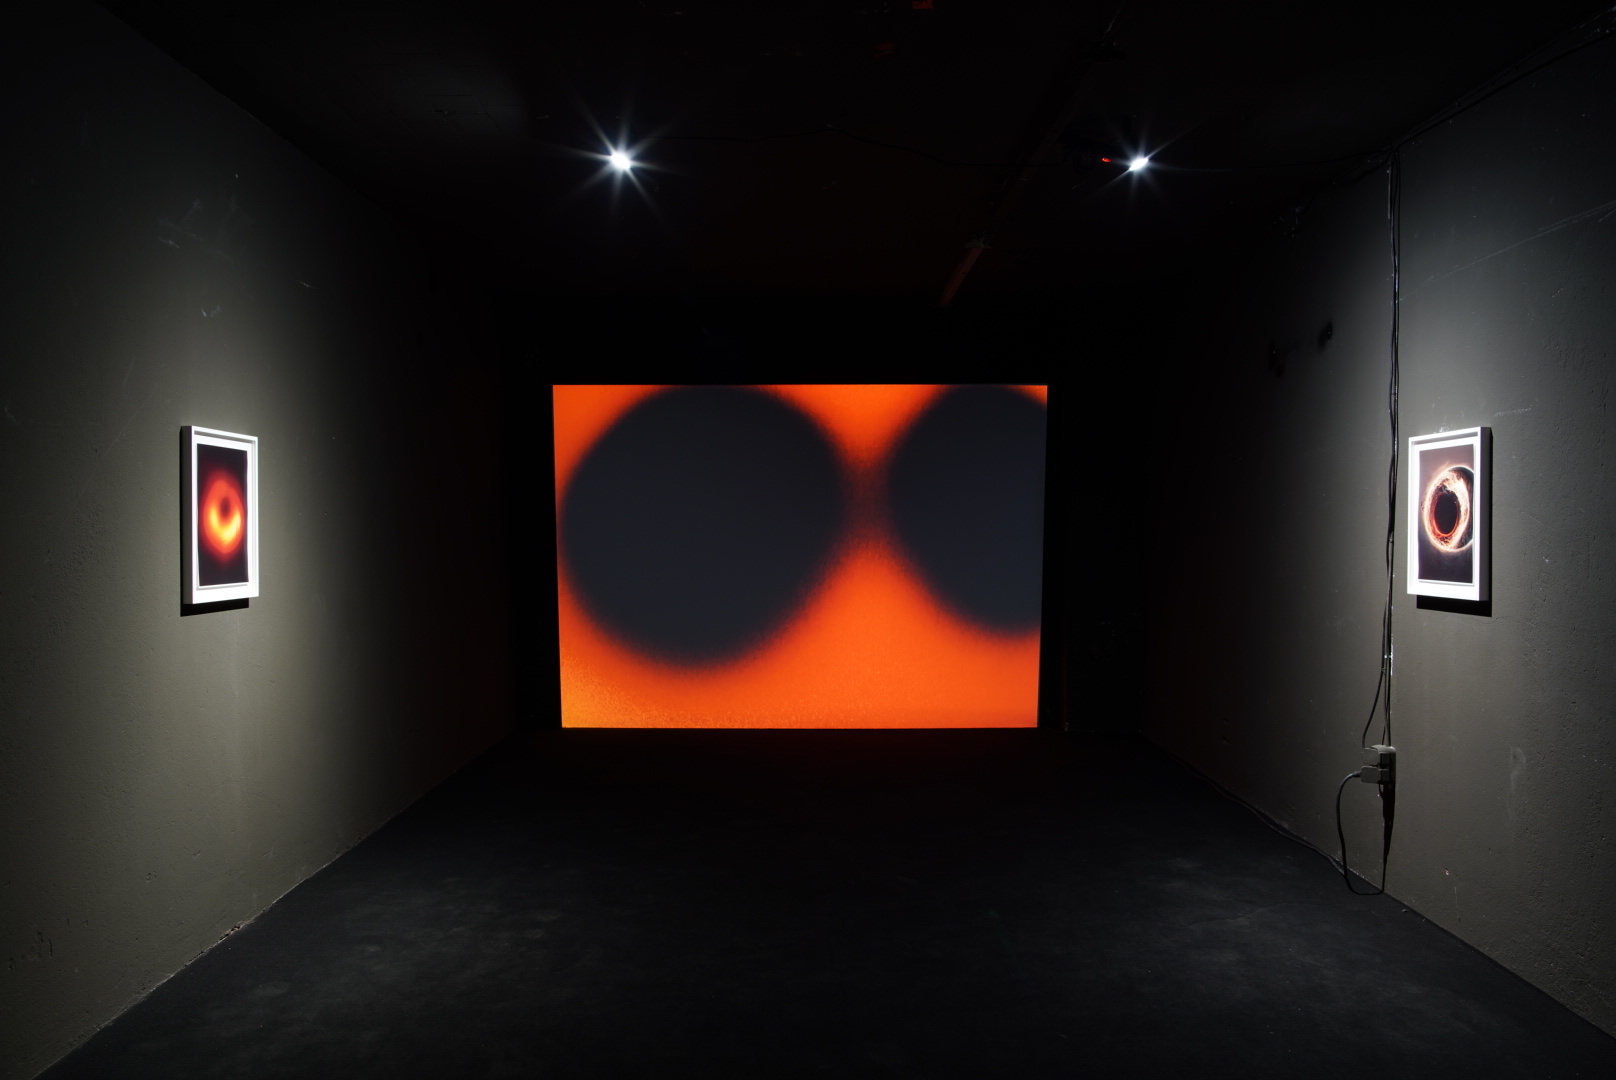 Stephan Machac GRAVITATIONAL WAVES (WITHOUT GRAVITY TEARS DON'T FALL) - Volume 2, 2022 2022 Installation view - GRAVITATIONAL WAVES (WITHOUT GRAVITY TEARS DON'T FALL) Volume 2, 2022